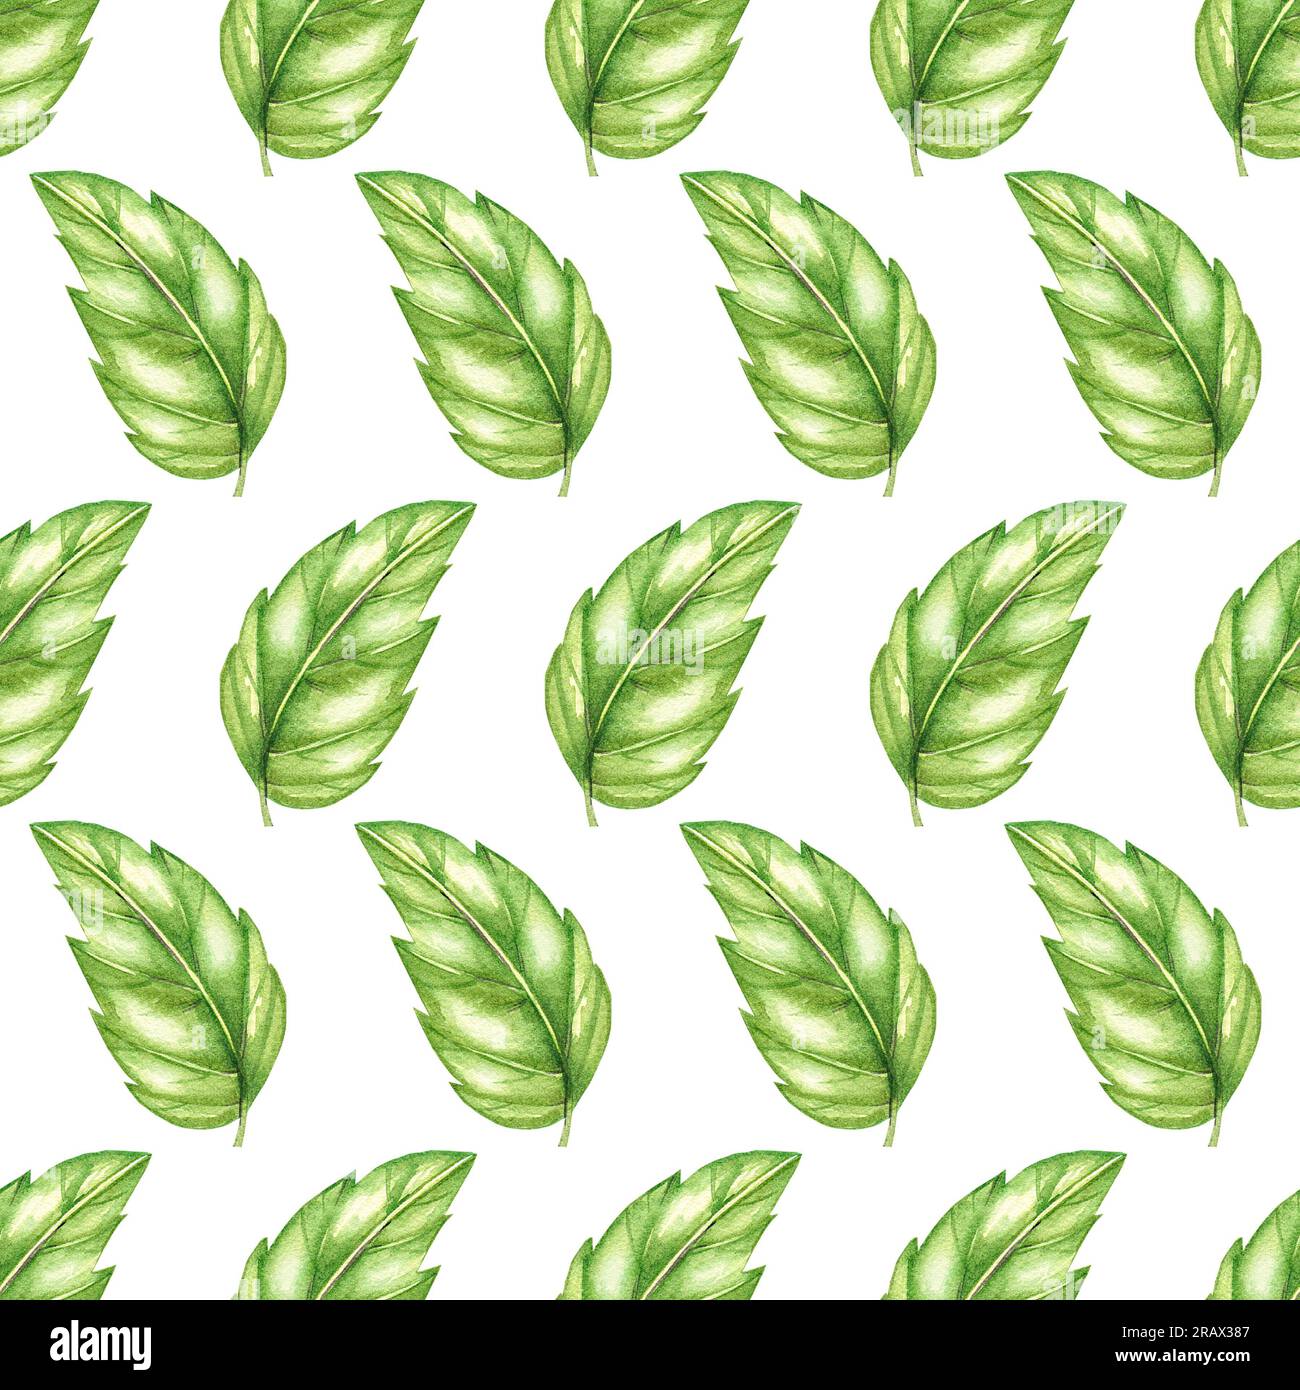 Pattern hibiscus leaves on a white background. Seamless floral patterns, hand drawn with watercolor elements for the design of textiles, fabrics, logo Stock Photo